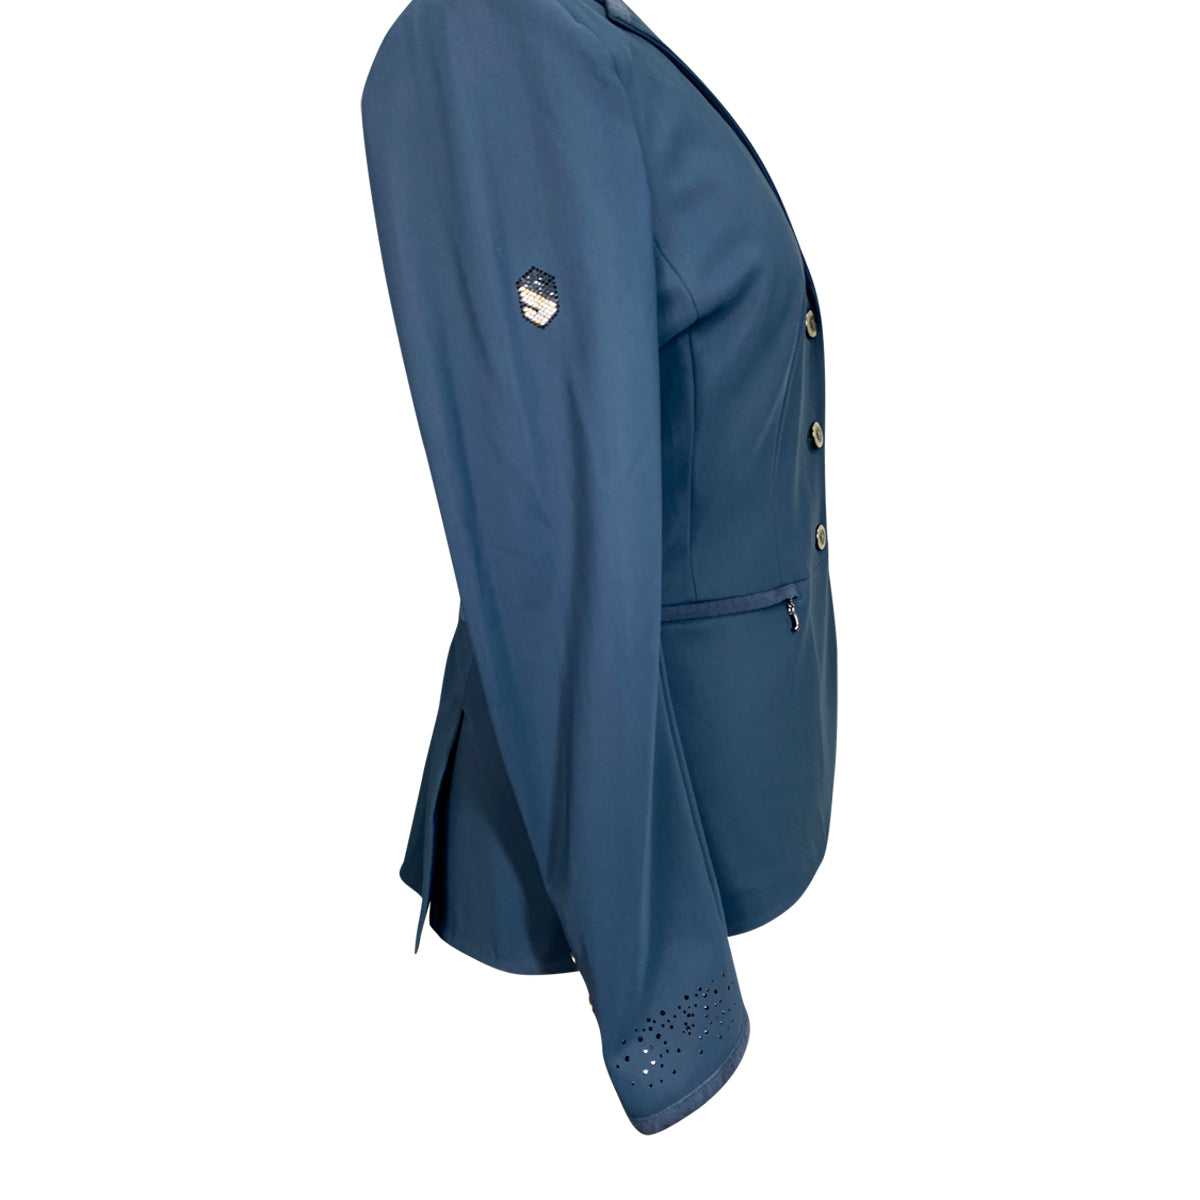 Samshield 'Victorine' Crystal Fabric Competition Jacket in Light Navy